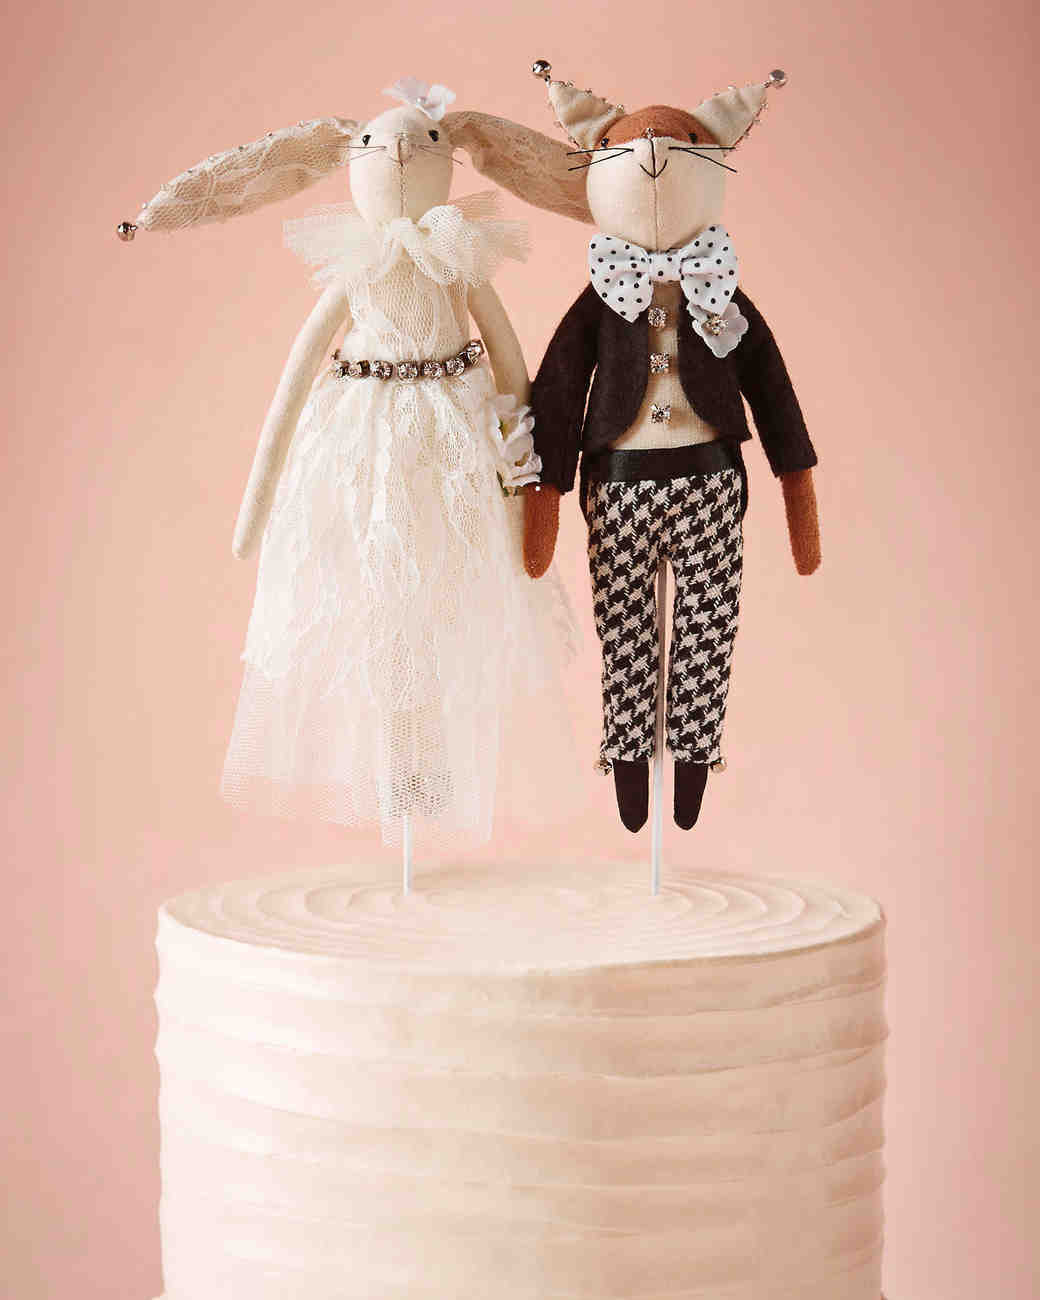 Cake Toppers For Weddings Unique
 25 Unique Wedding Cake Toppers